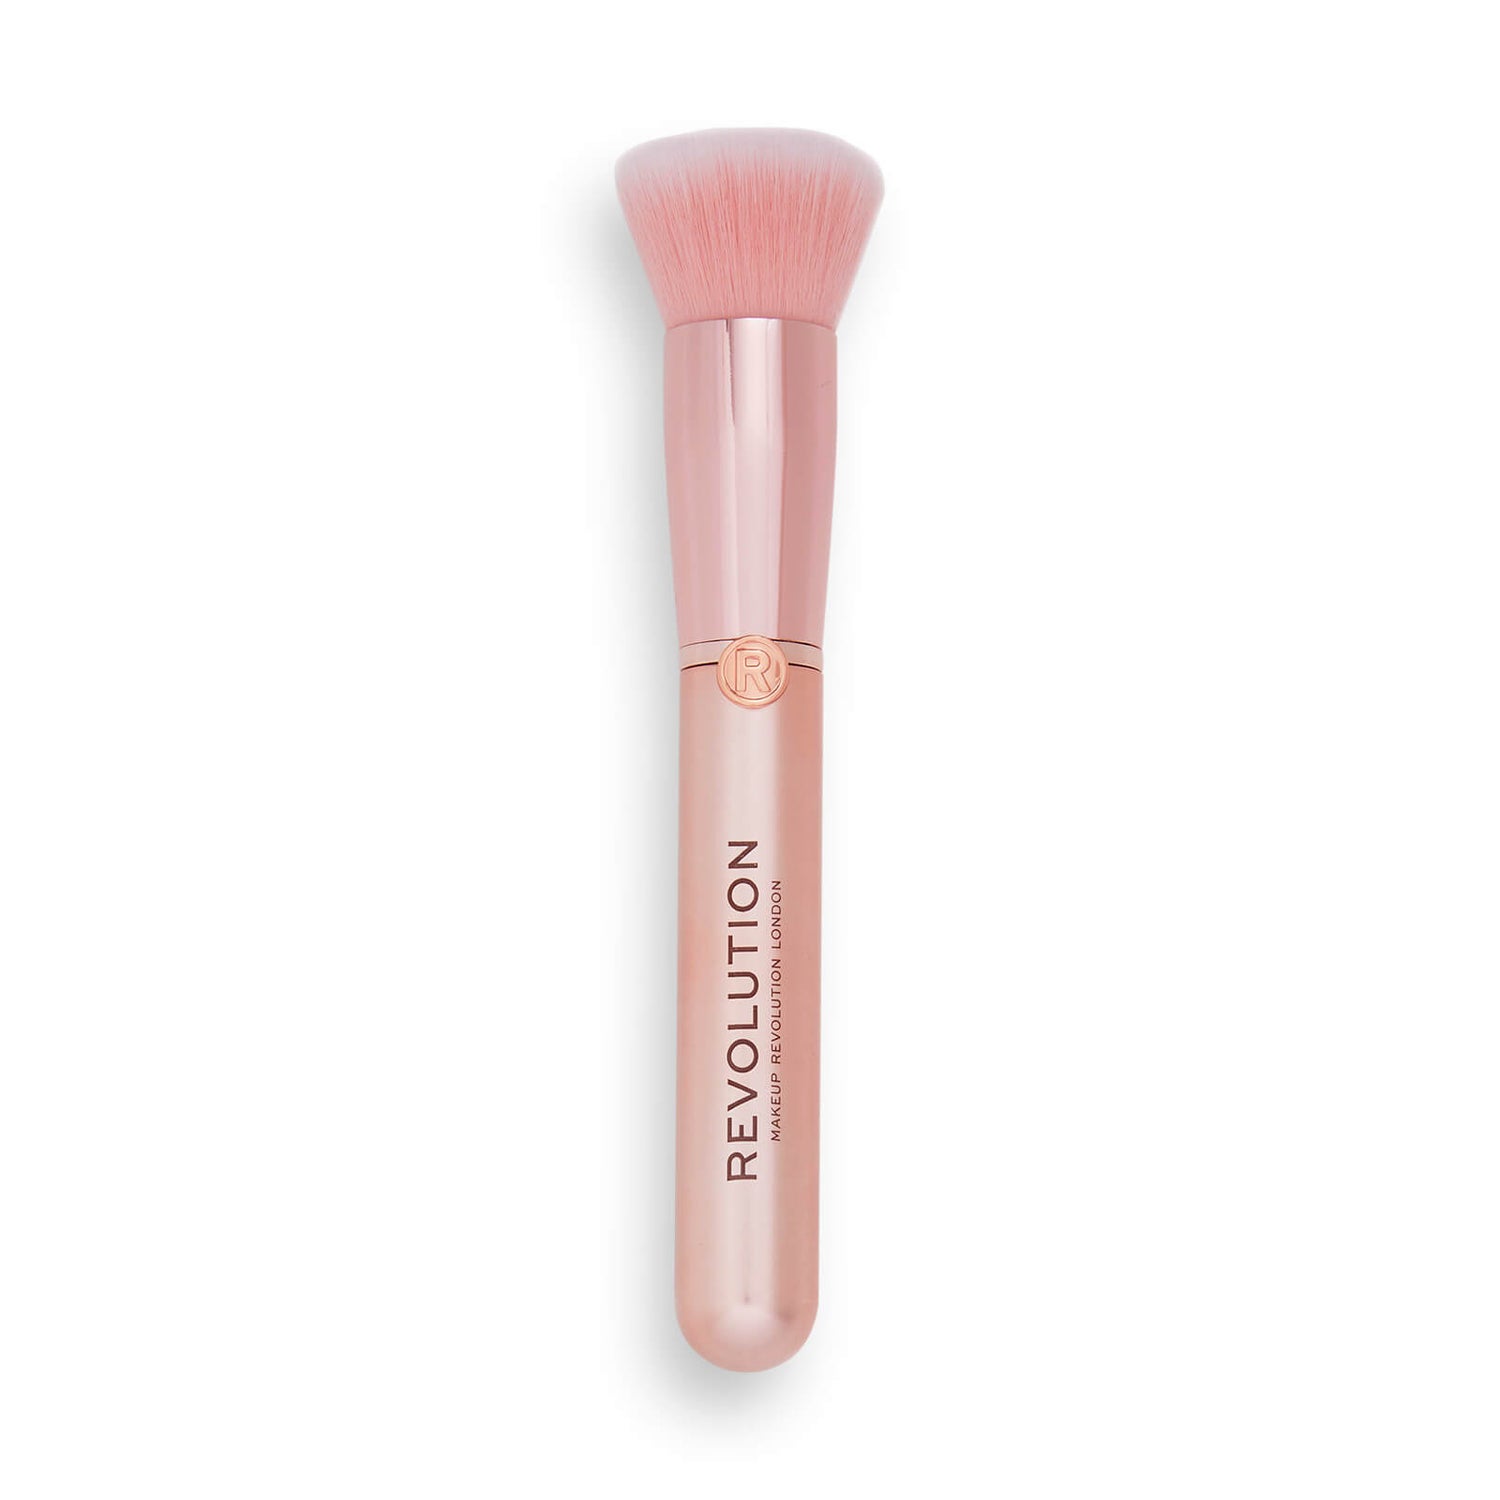 Makeup Revolution Create Buff and Blend Foundation Brush R27